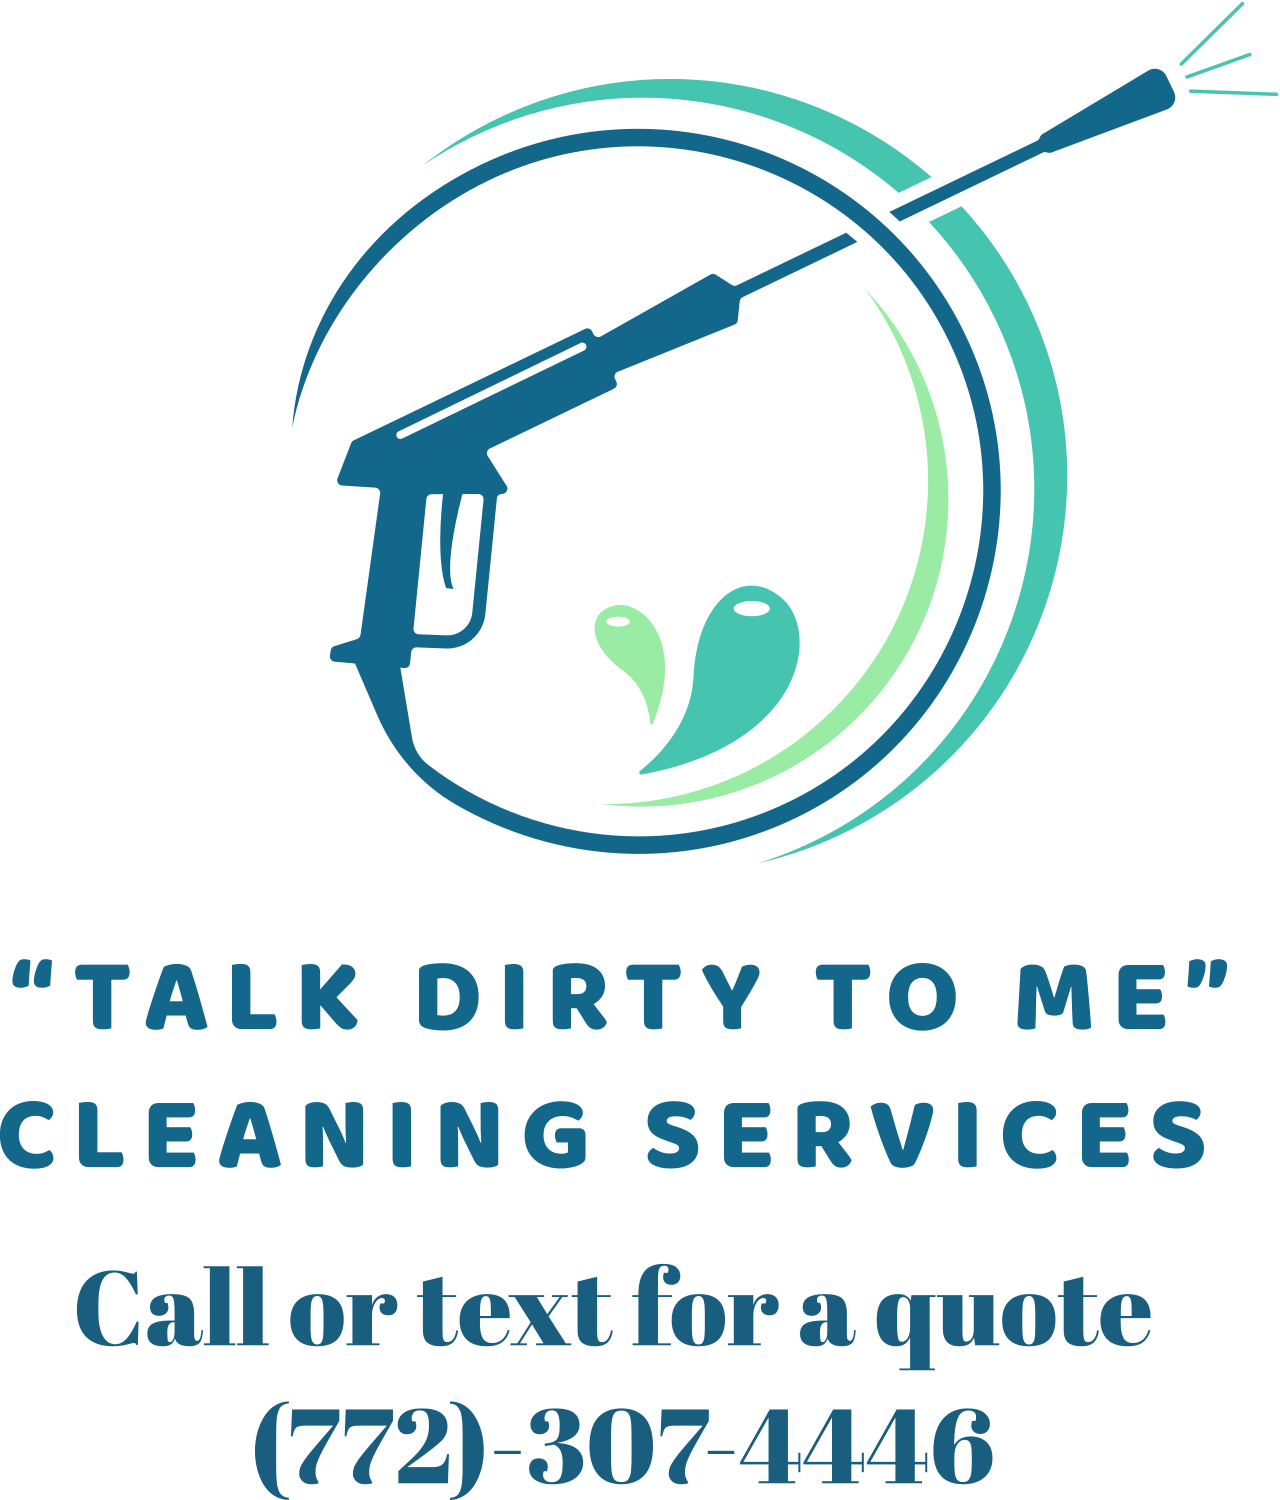 “TALK DIRTY TO ME”
CLEANING SERVICES 's web page